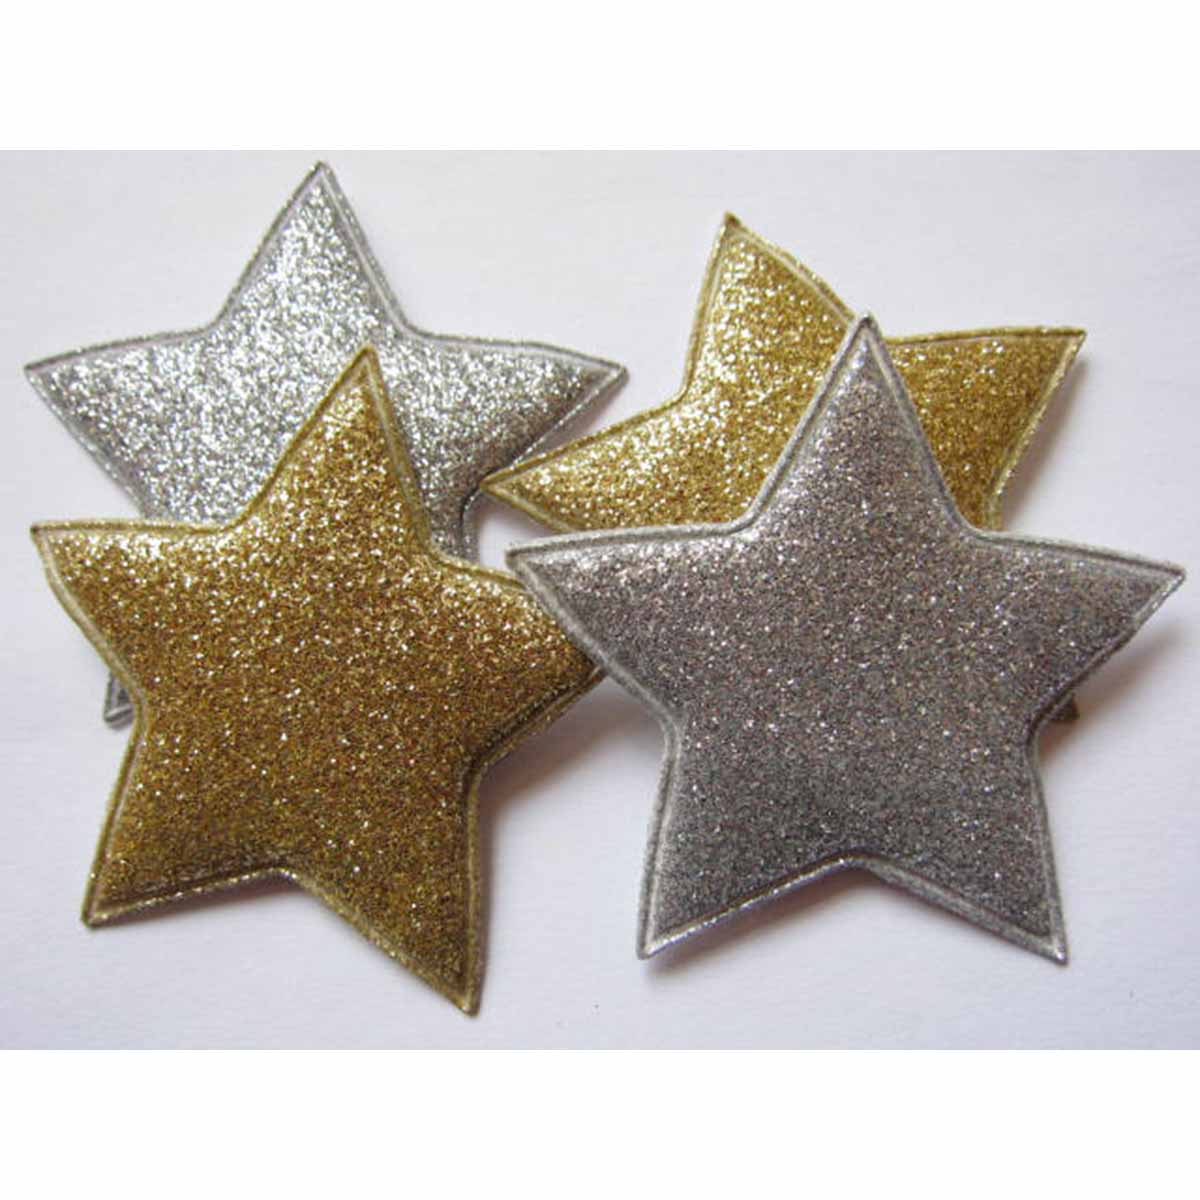 40 Large Glitter Star 2 1/8″ -Gold/Silver